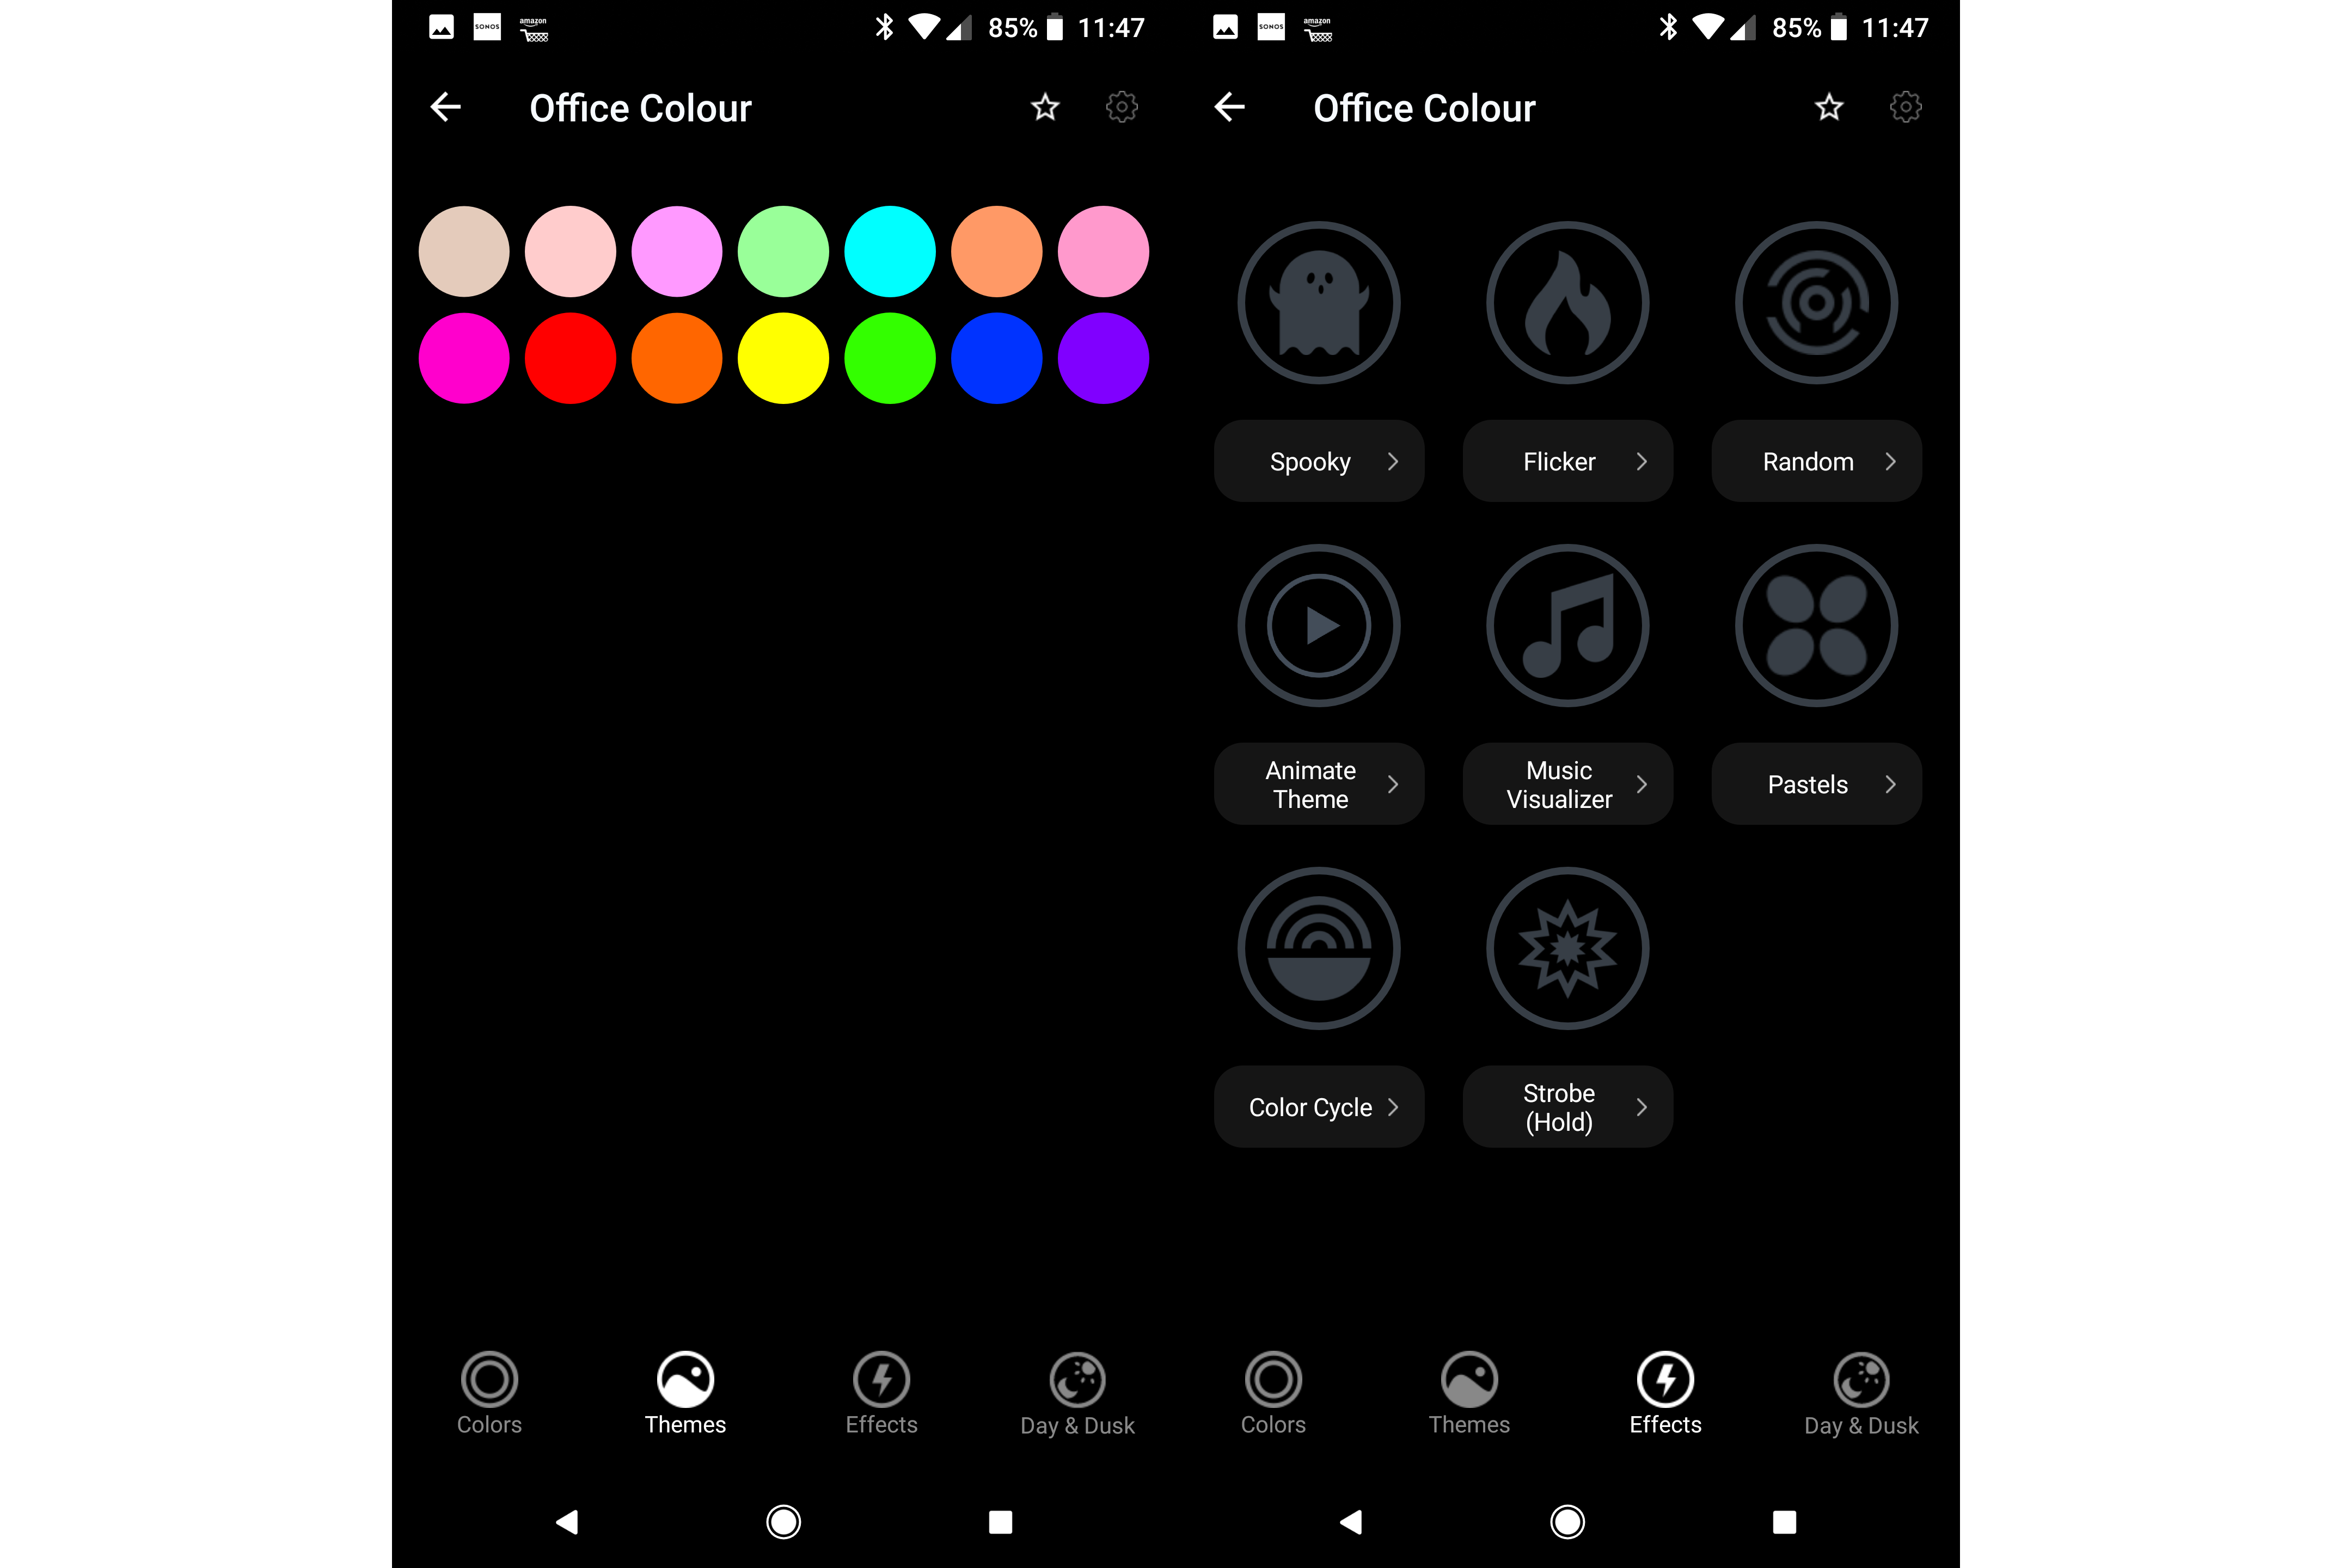 Smartphone app interface for controlling LIFX Mini Smart Bulb colors and effects.